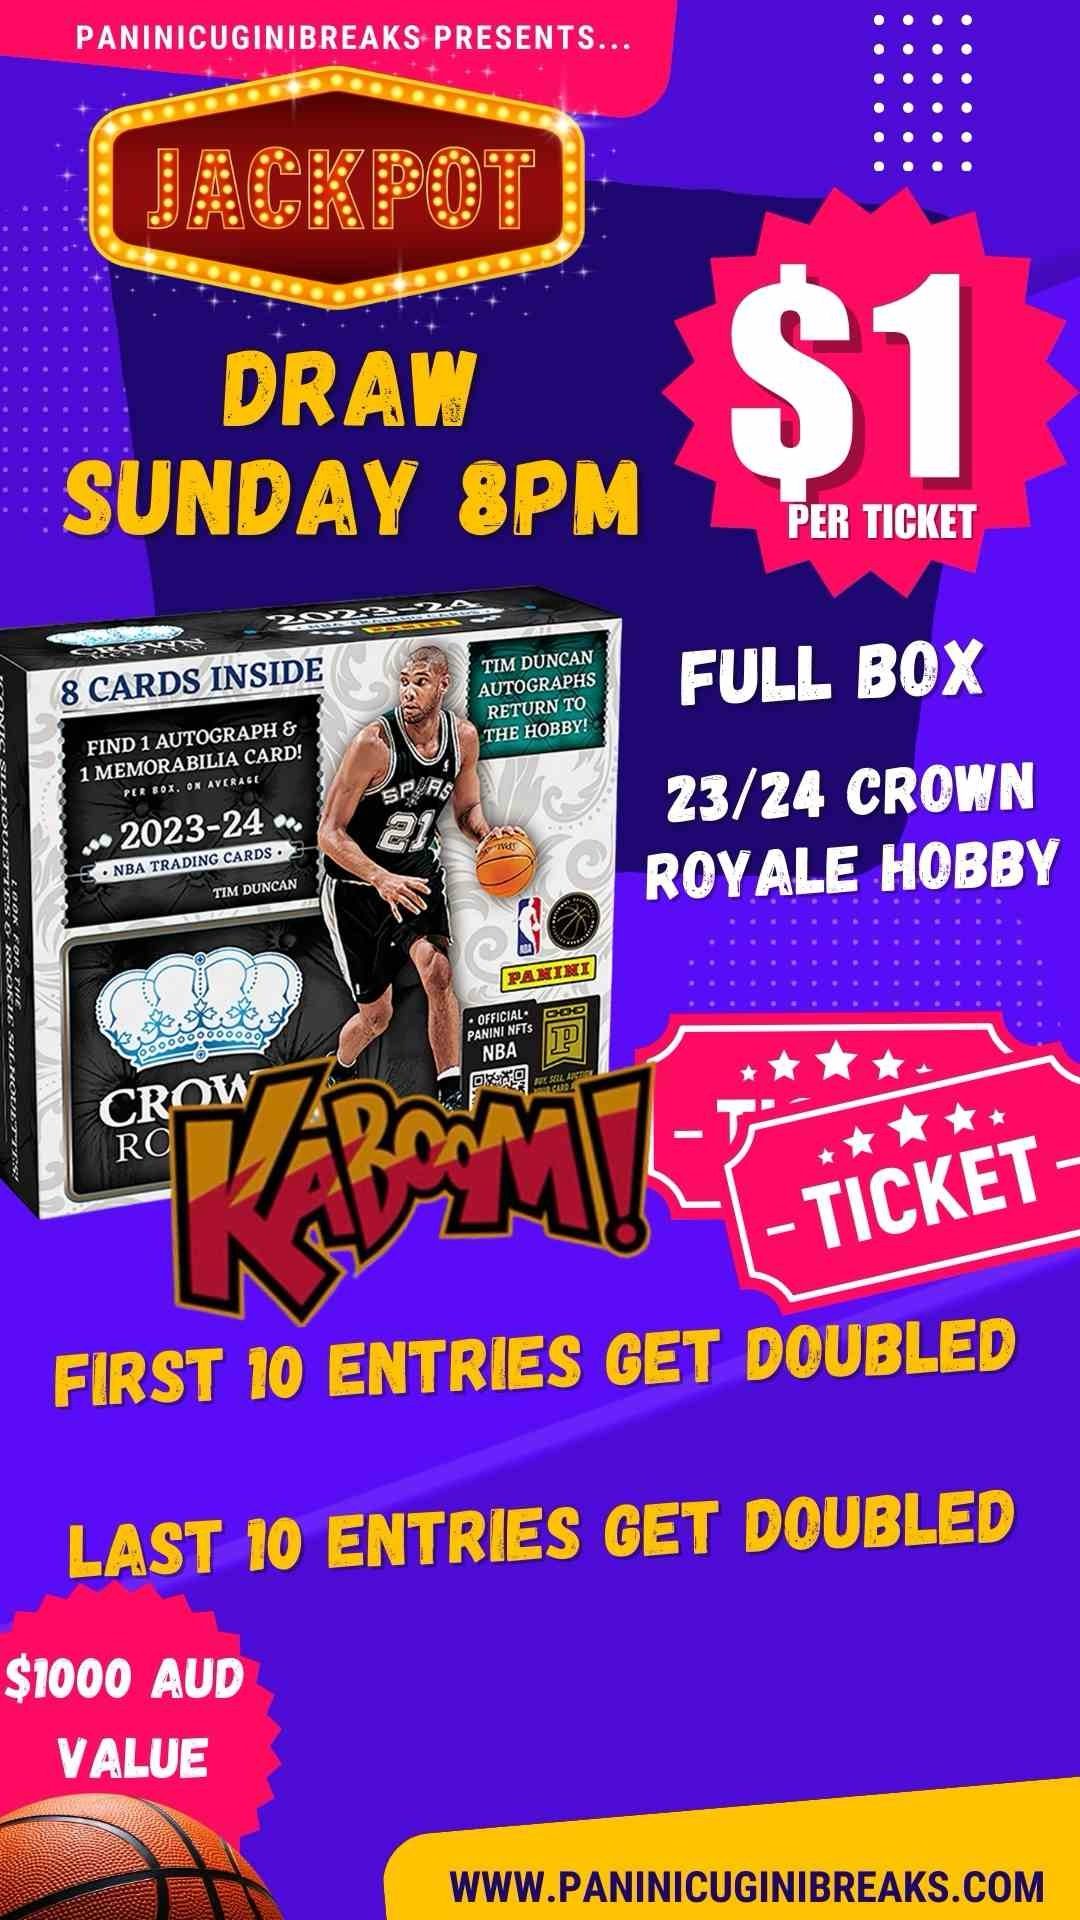 $1 TICKETS - JACKPOT FLASH! 23/24 CROWN ROYALE HOBBY BOX! KABOOM CHASE!! DRAW ON SUNDAY NIGHT - 8PM!